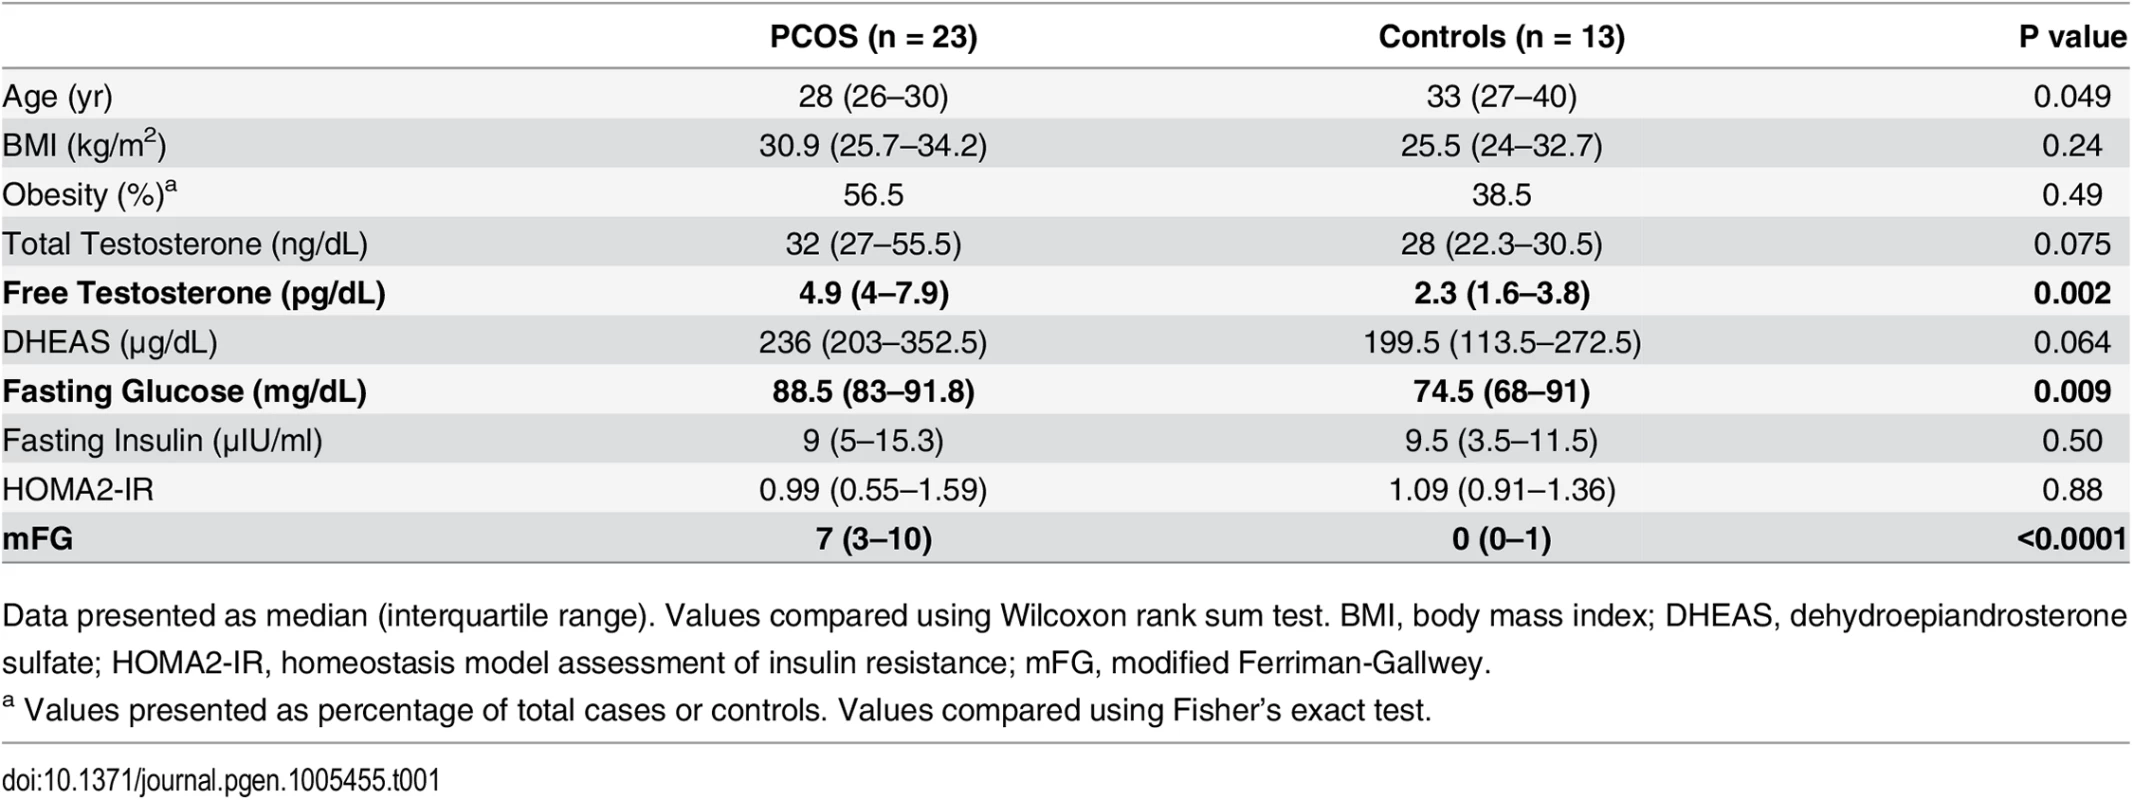 Baseline characteristics of PCOS and control subjects.